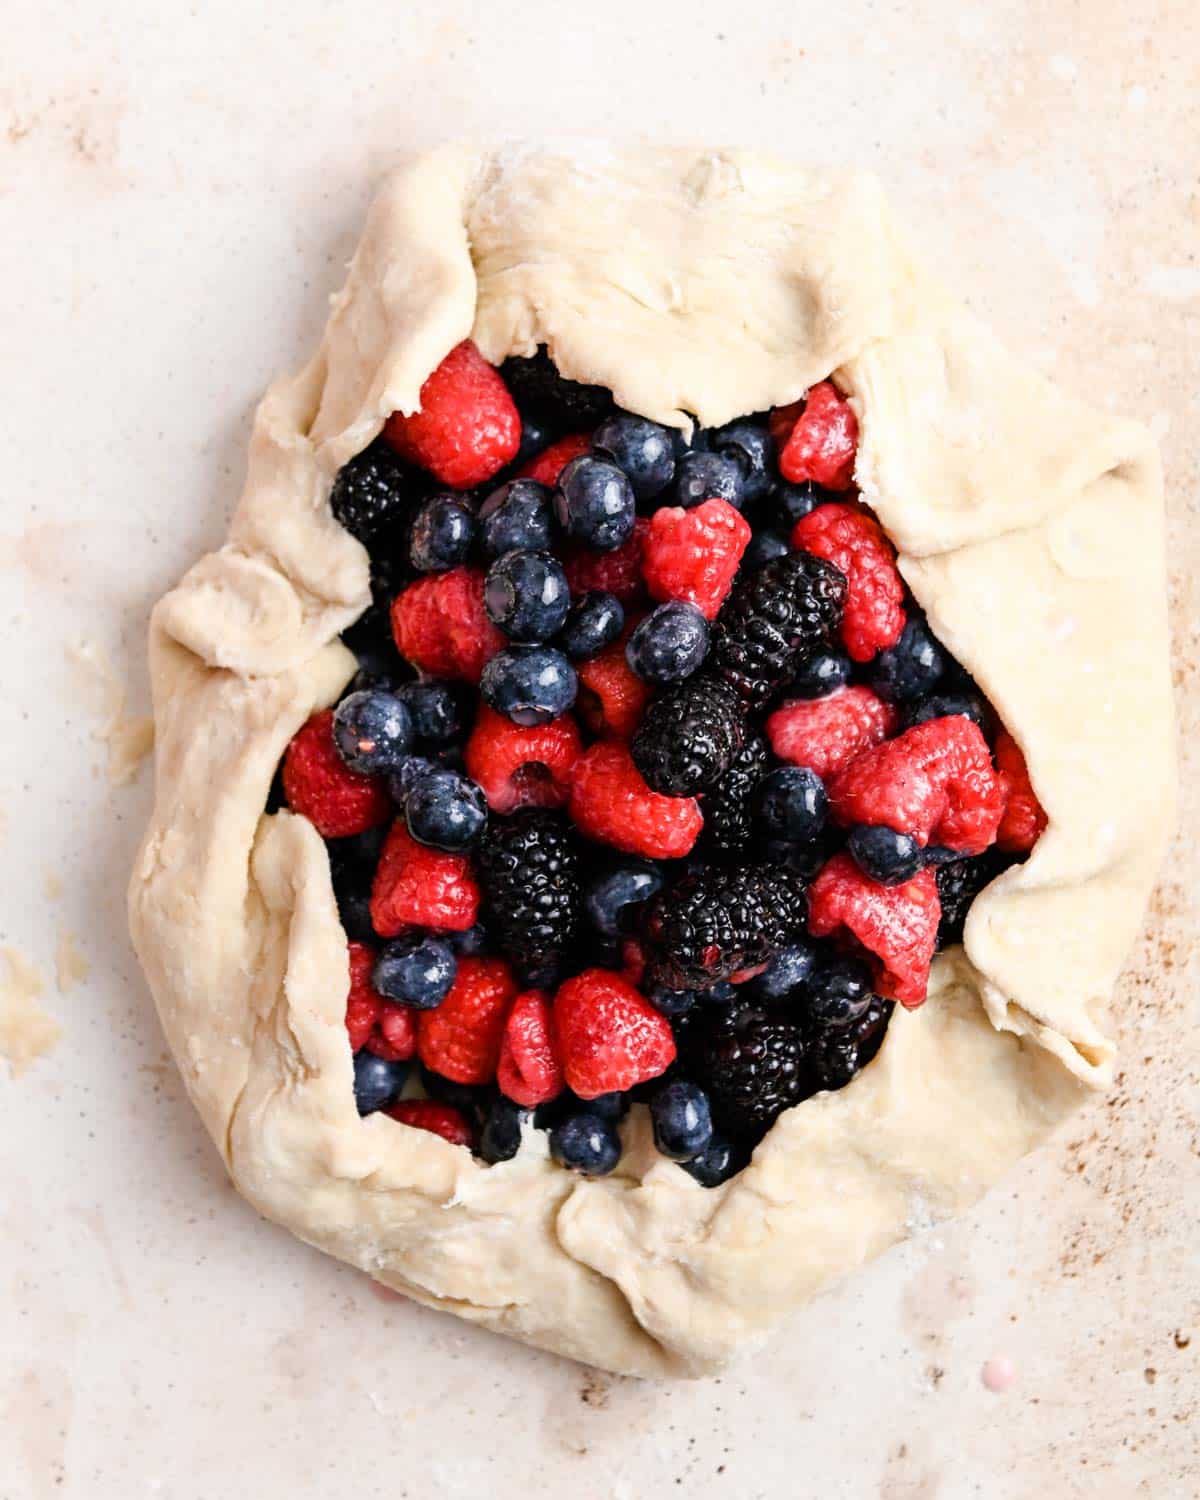 Galette dough filled with mixed berries before cooking.